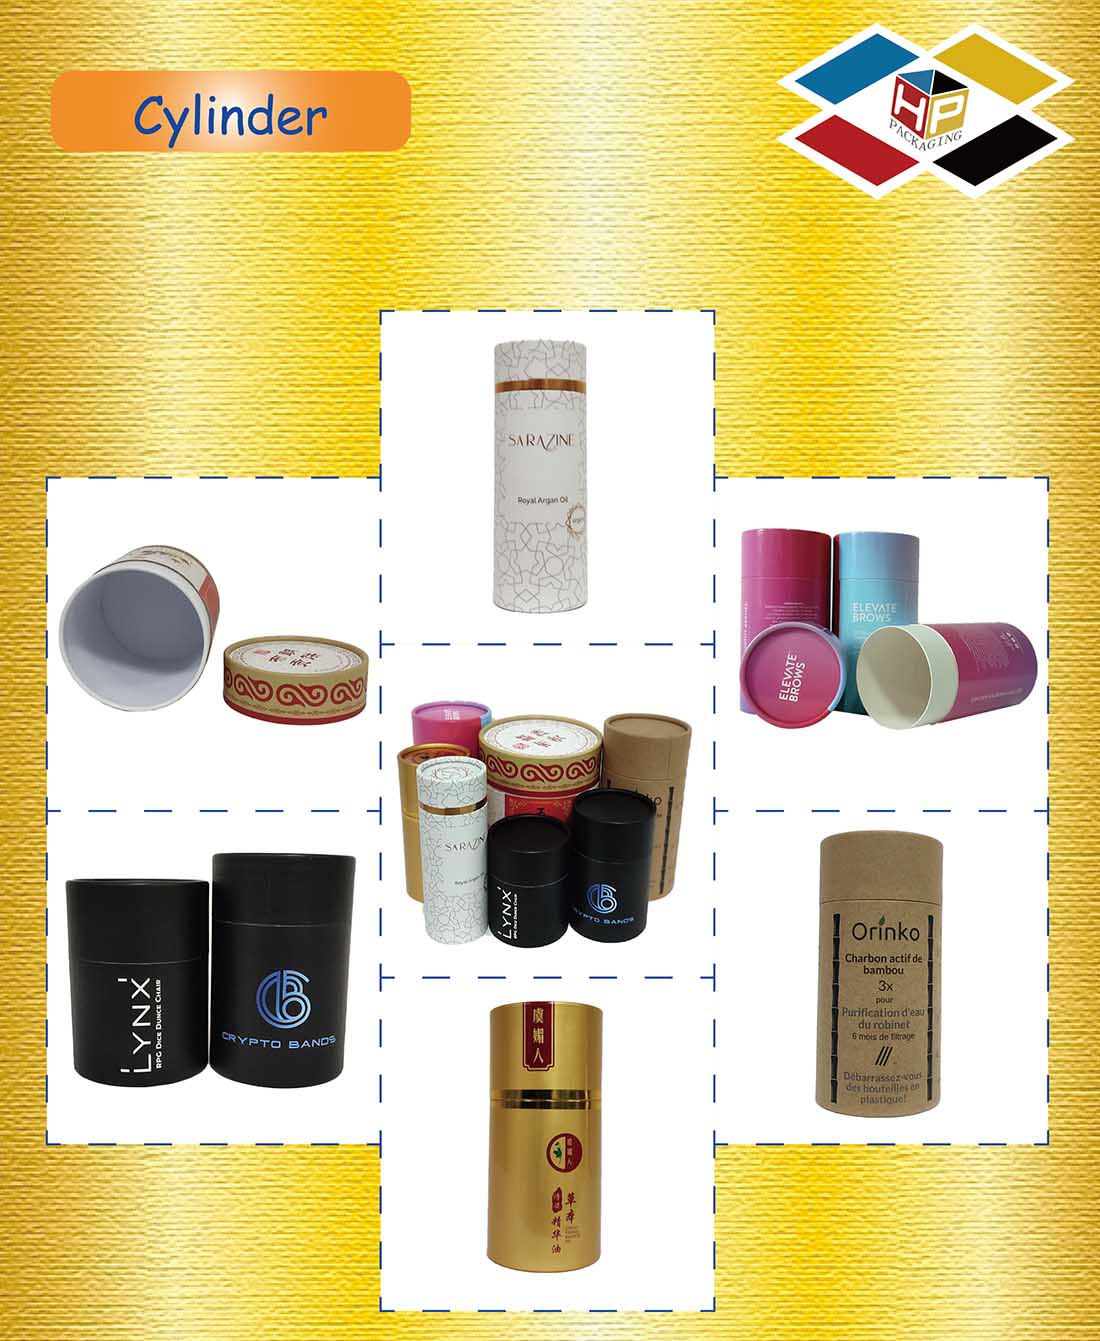 paper tube with logo printing